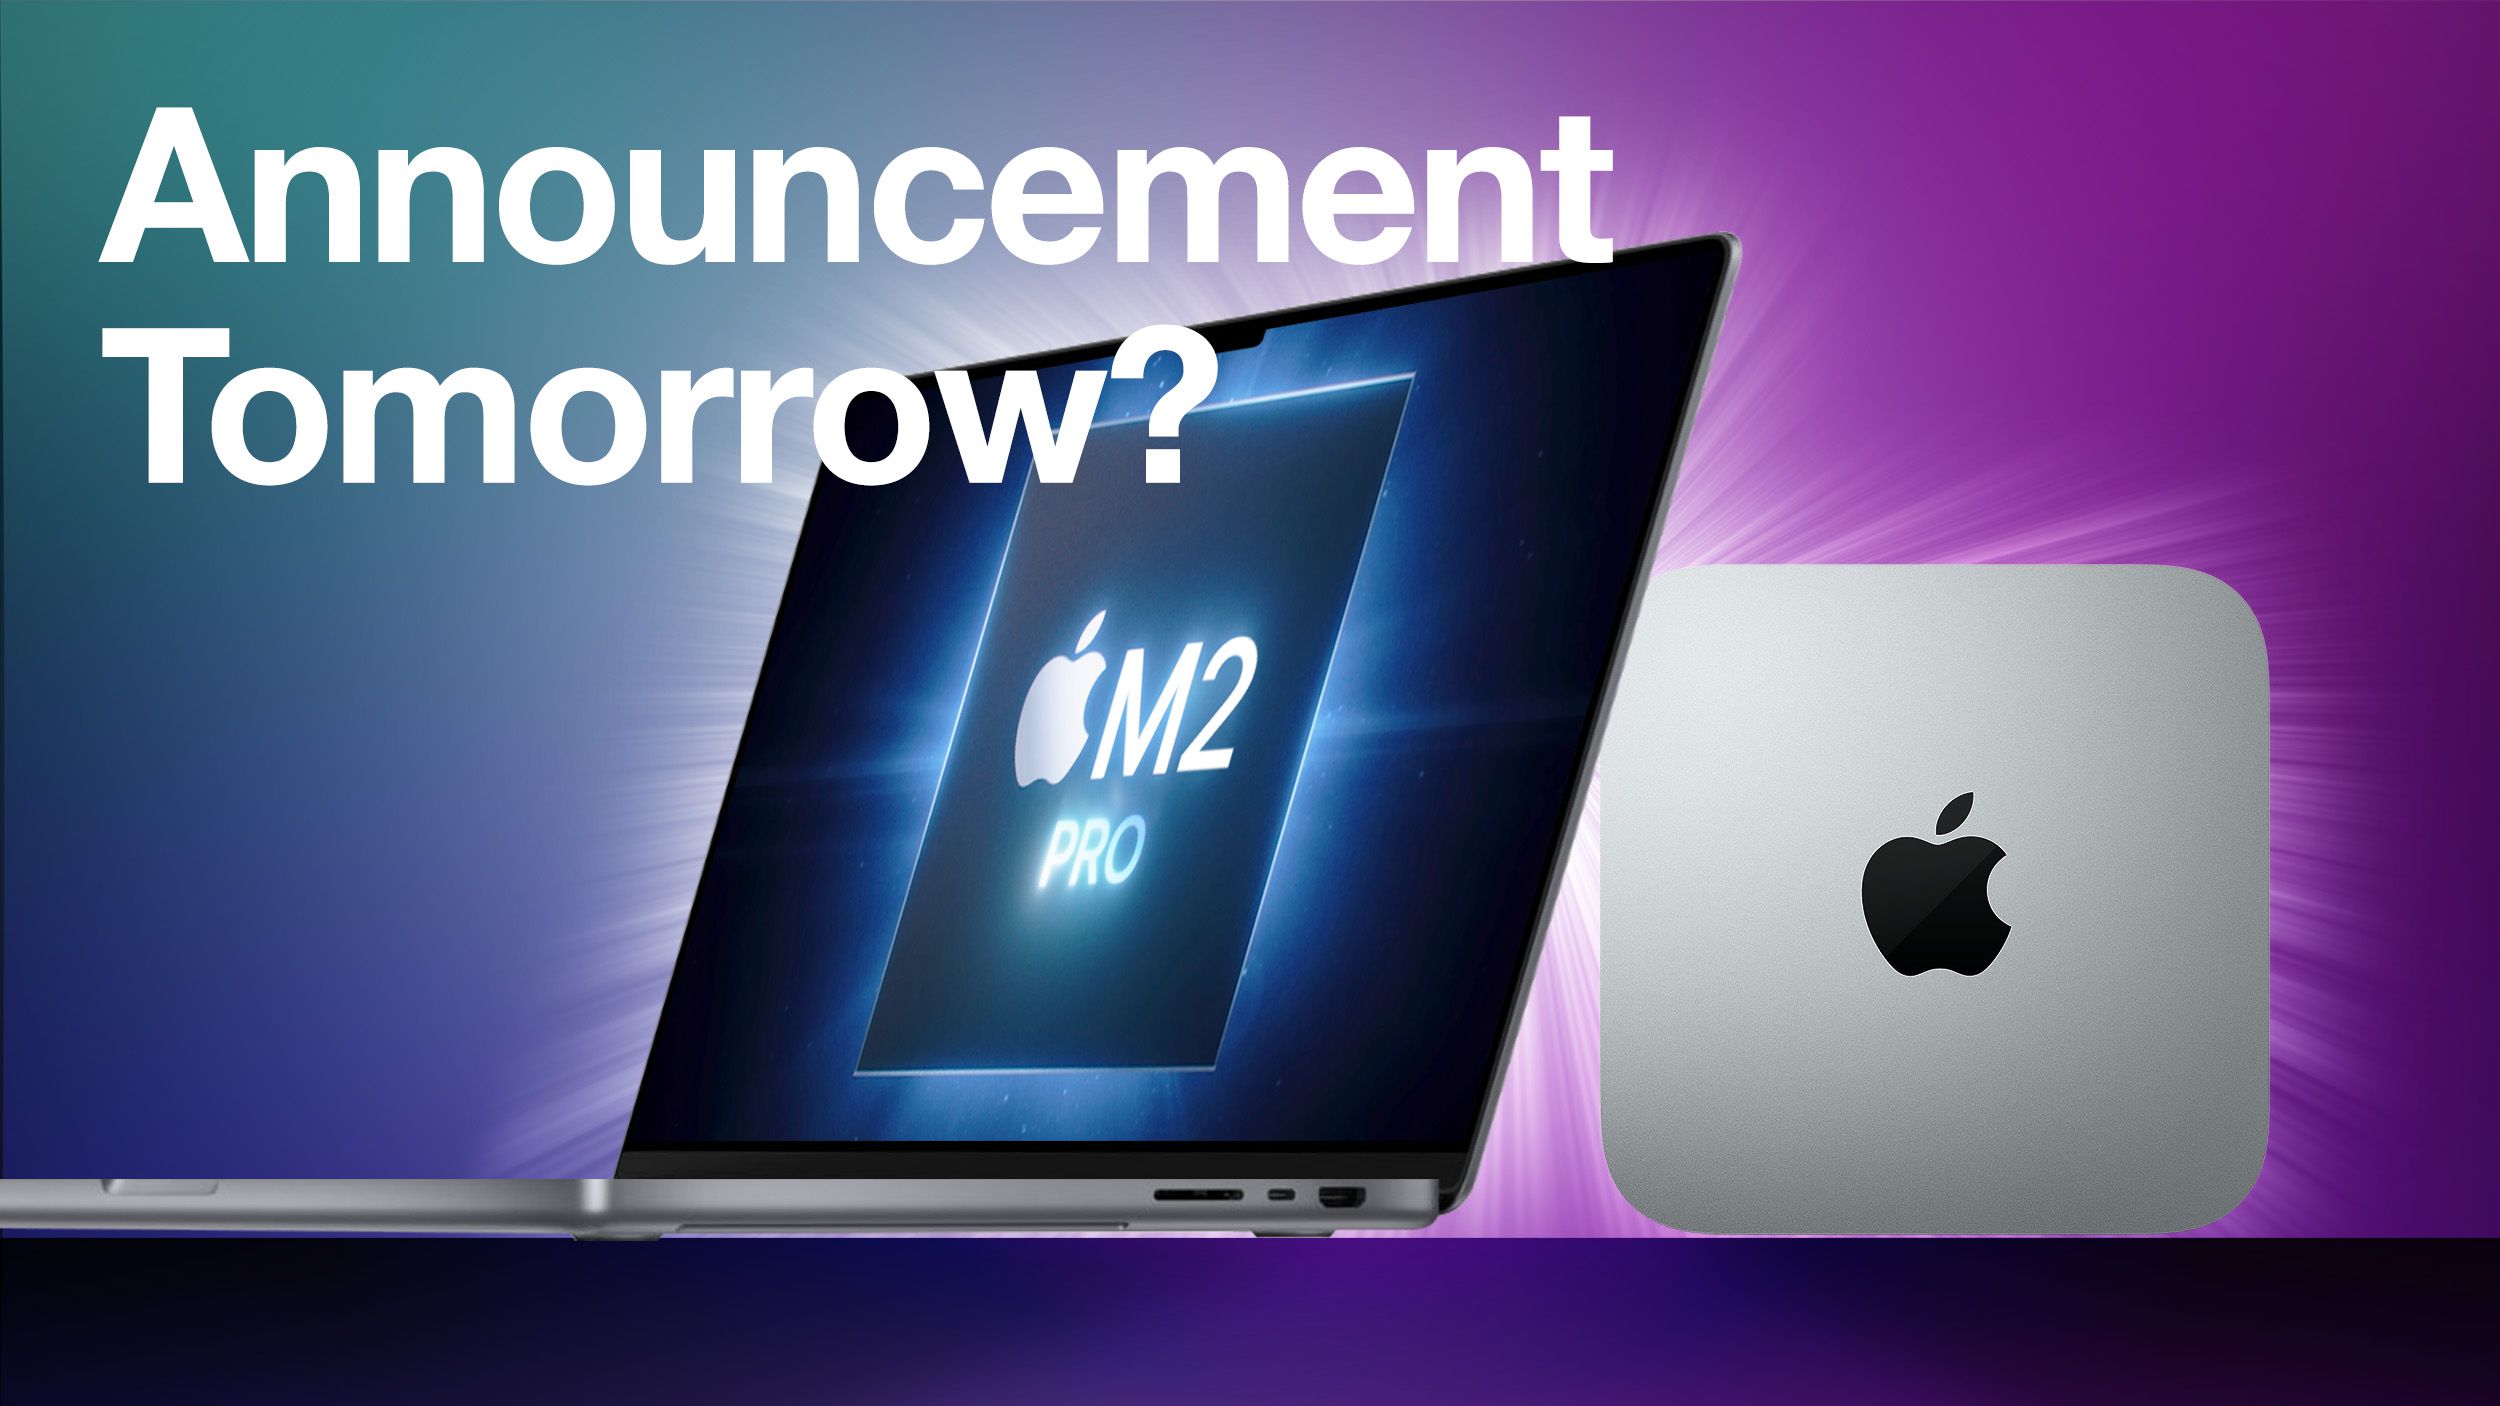 Apple Rumored to Have Product Announcement Tomorrow - macrumors.com